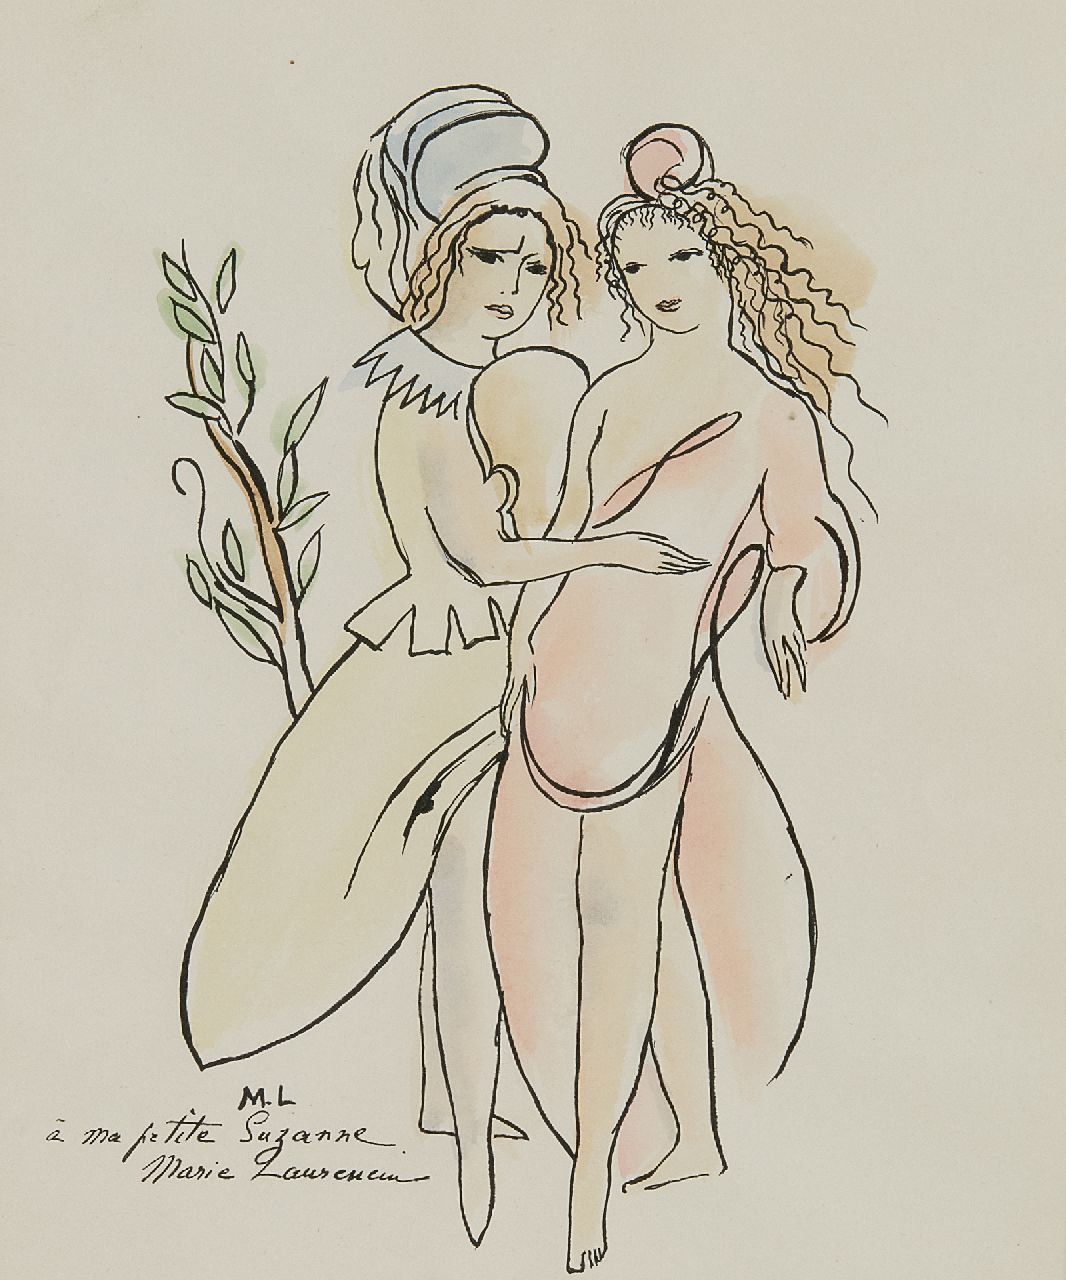 Laurencin M.  | 'Marie' Mélanie Laurencin | Watercolours and drawings offered for sale | Two women, pen, ink and watercolour on paper 25.0 x 21.5 cm, signed l.l. with initials